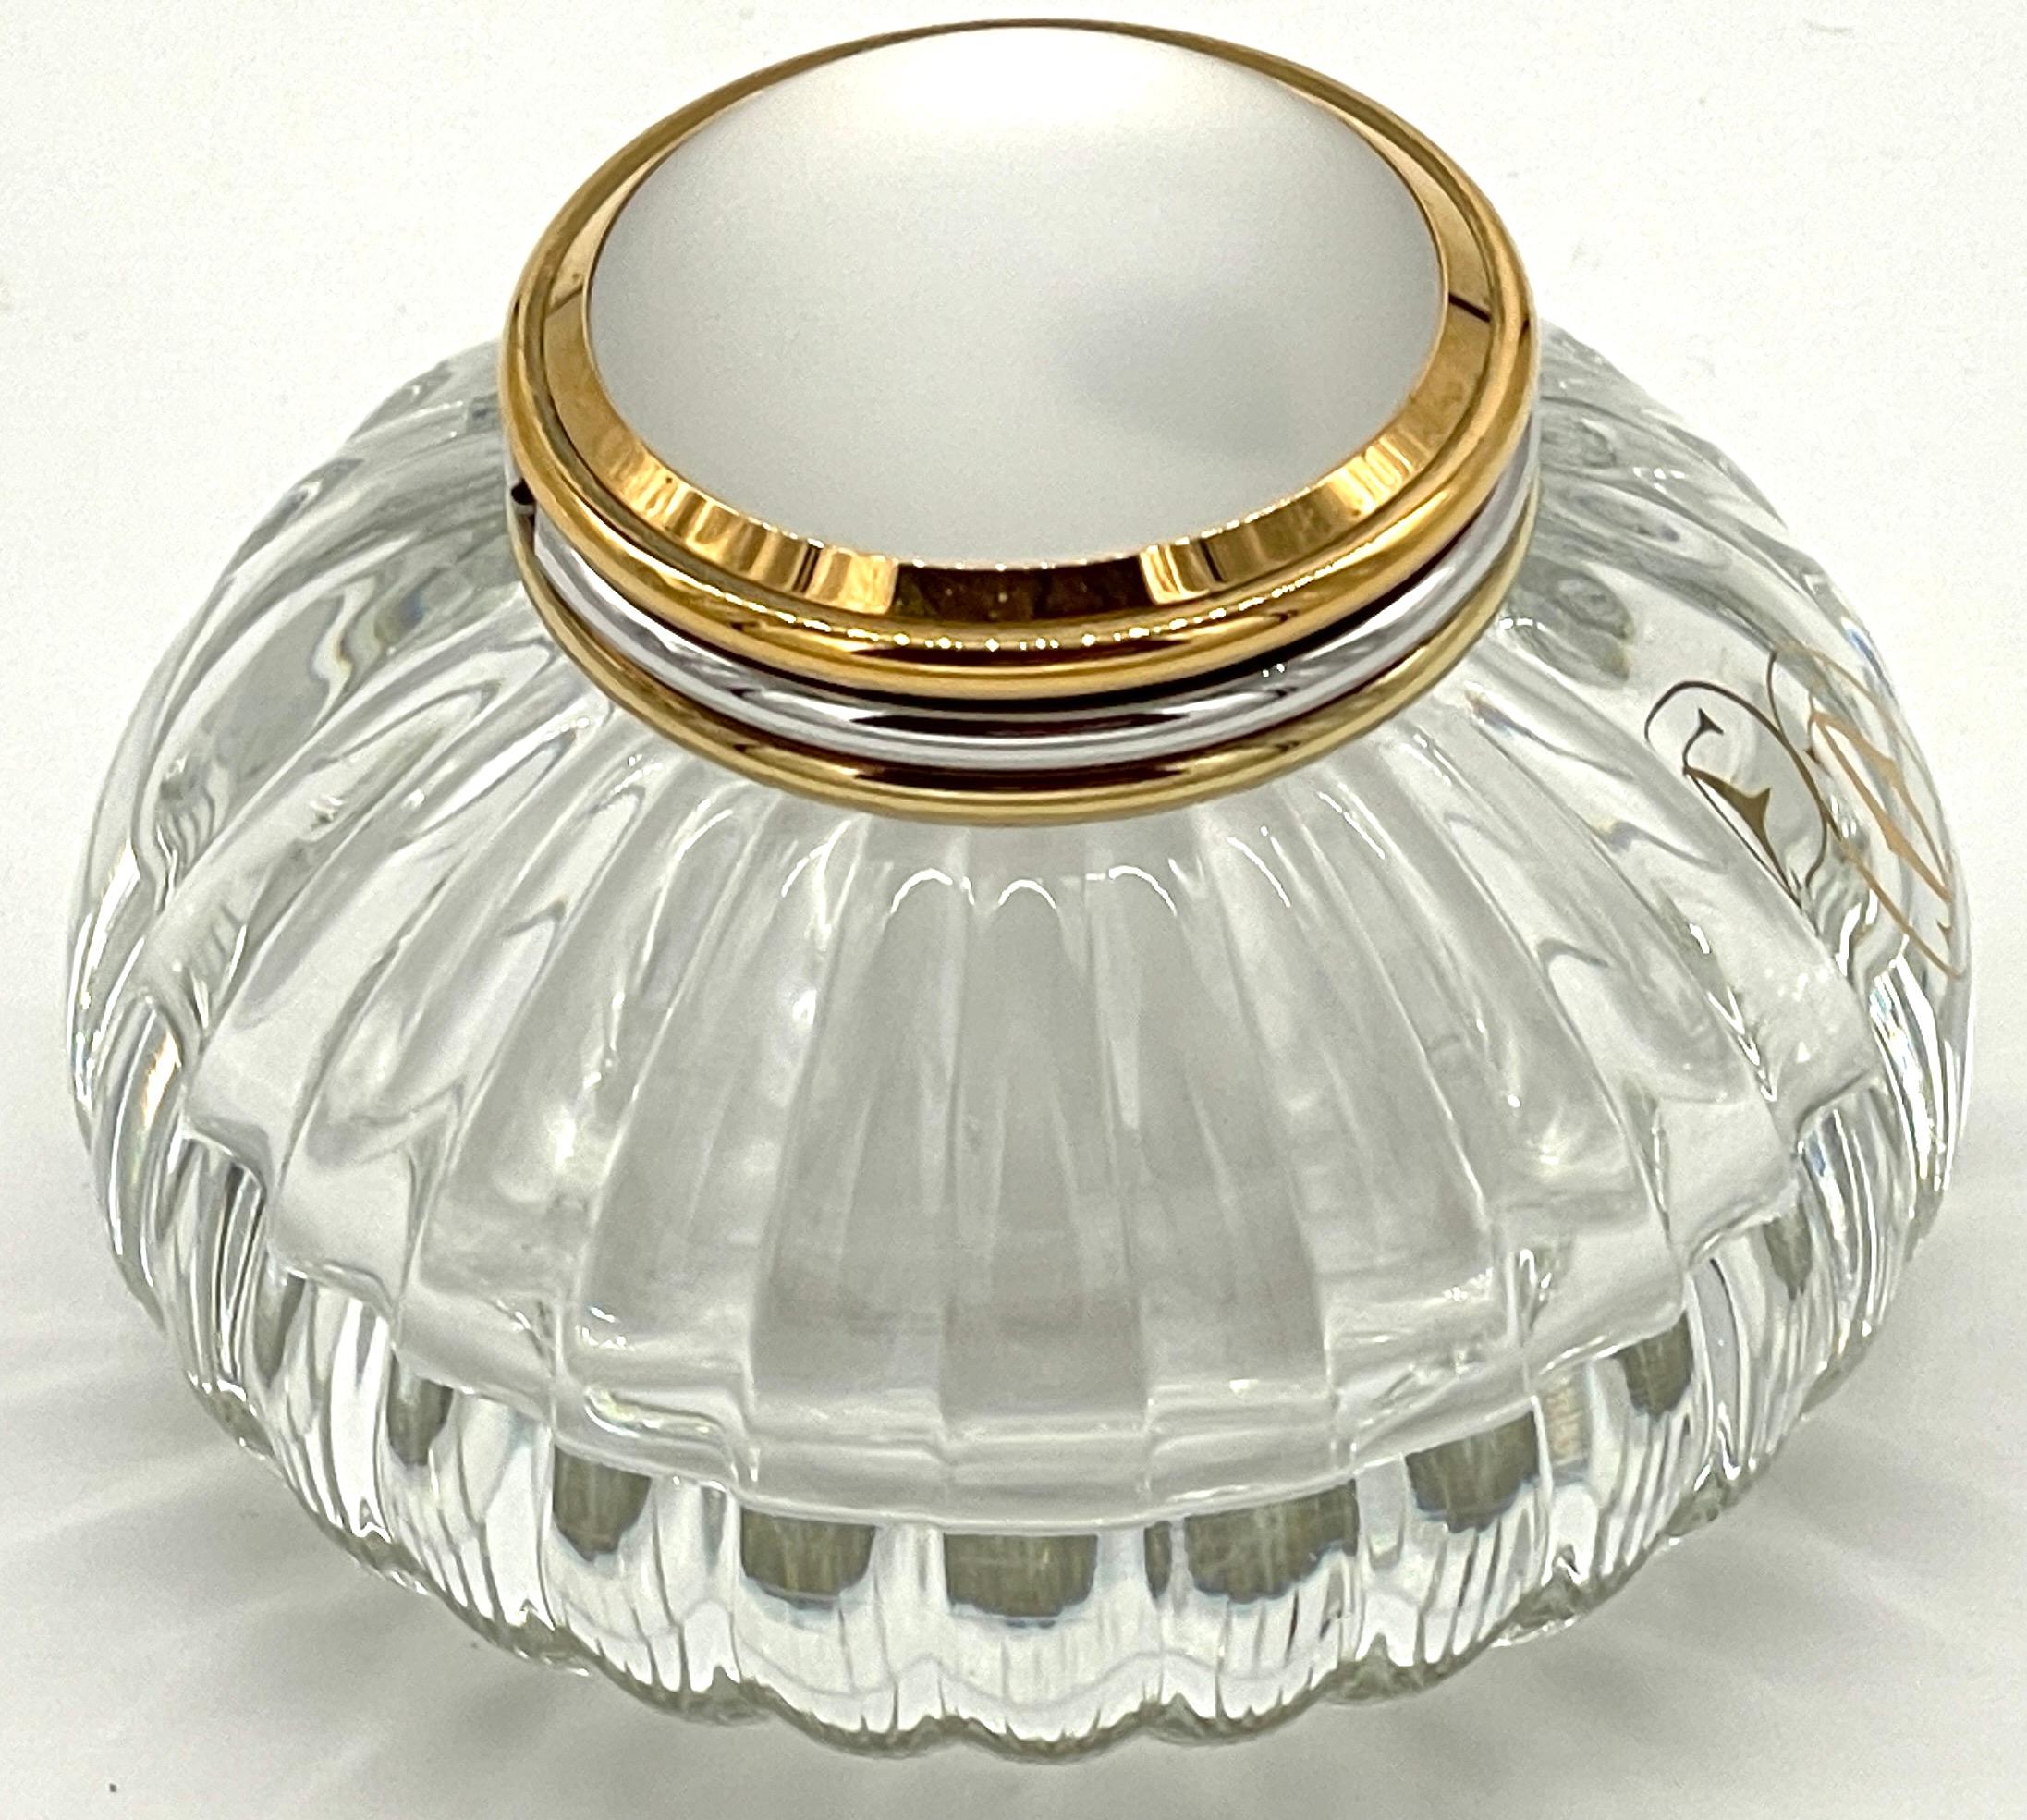 French Cartier 'Must de Cartier' Crystal Gilt and Silver Mellon Inkwell For Sale